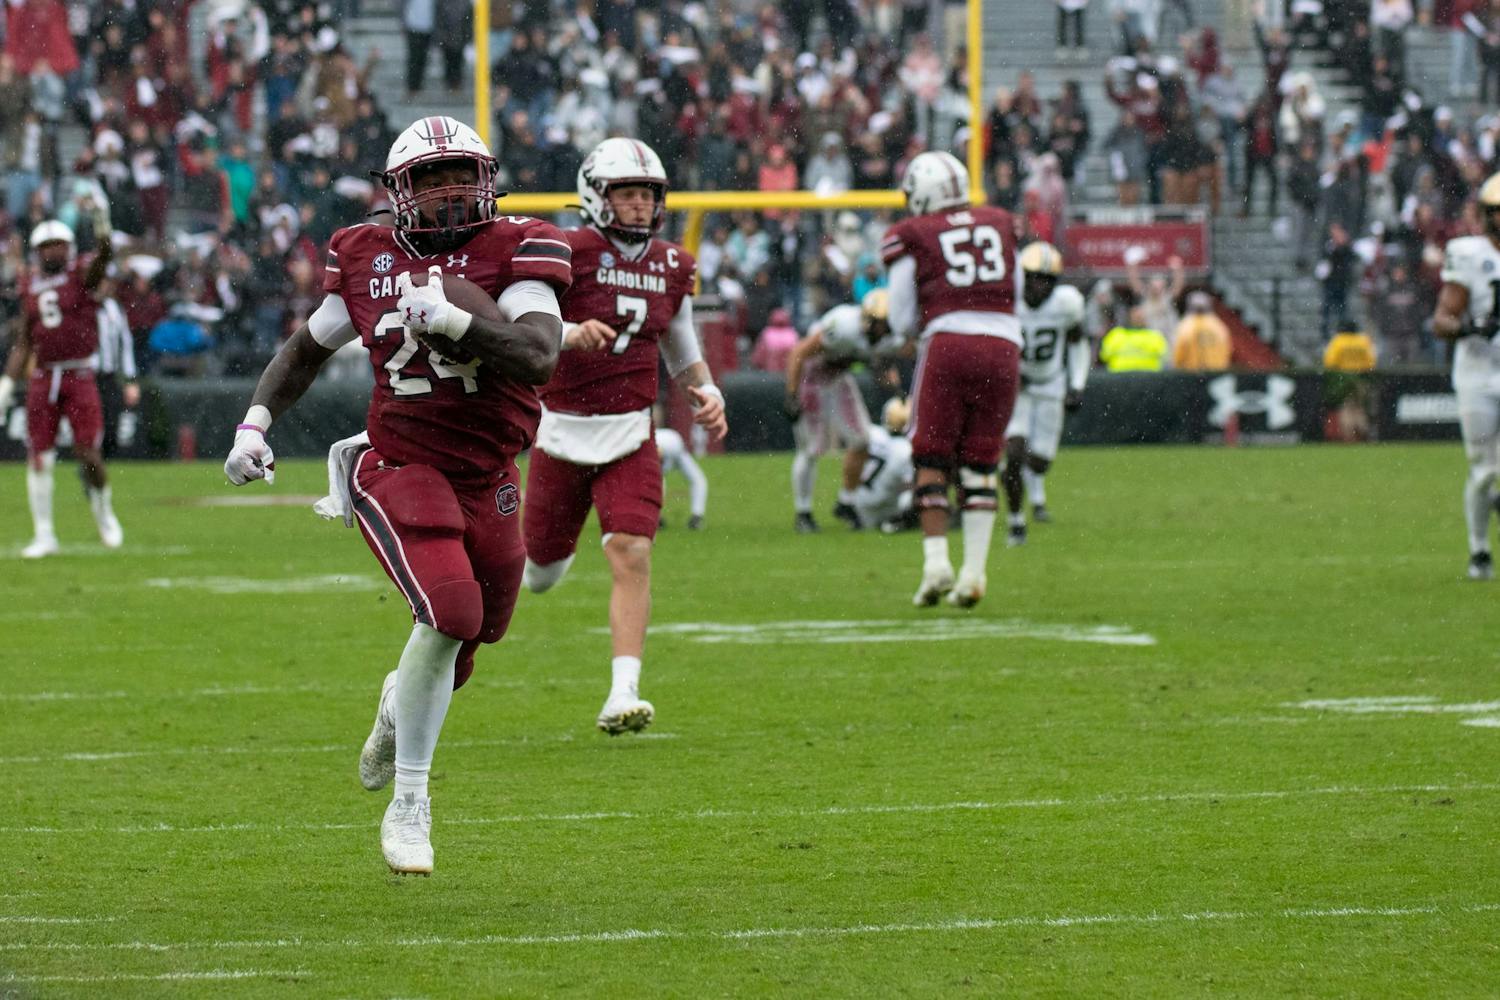 The South Carolina ɫɫƵs faced the Vanderbilt Commodores at Williams-Brice Stadium on Nov. 11, 2023. The ɫɫƵs commanded a 47-6 victory, putting the team at 4-6 on the season. The ɫɫƵs totaled 487 yards to the Commodores' 234.